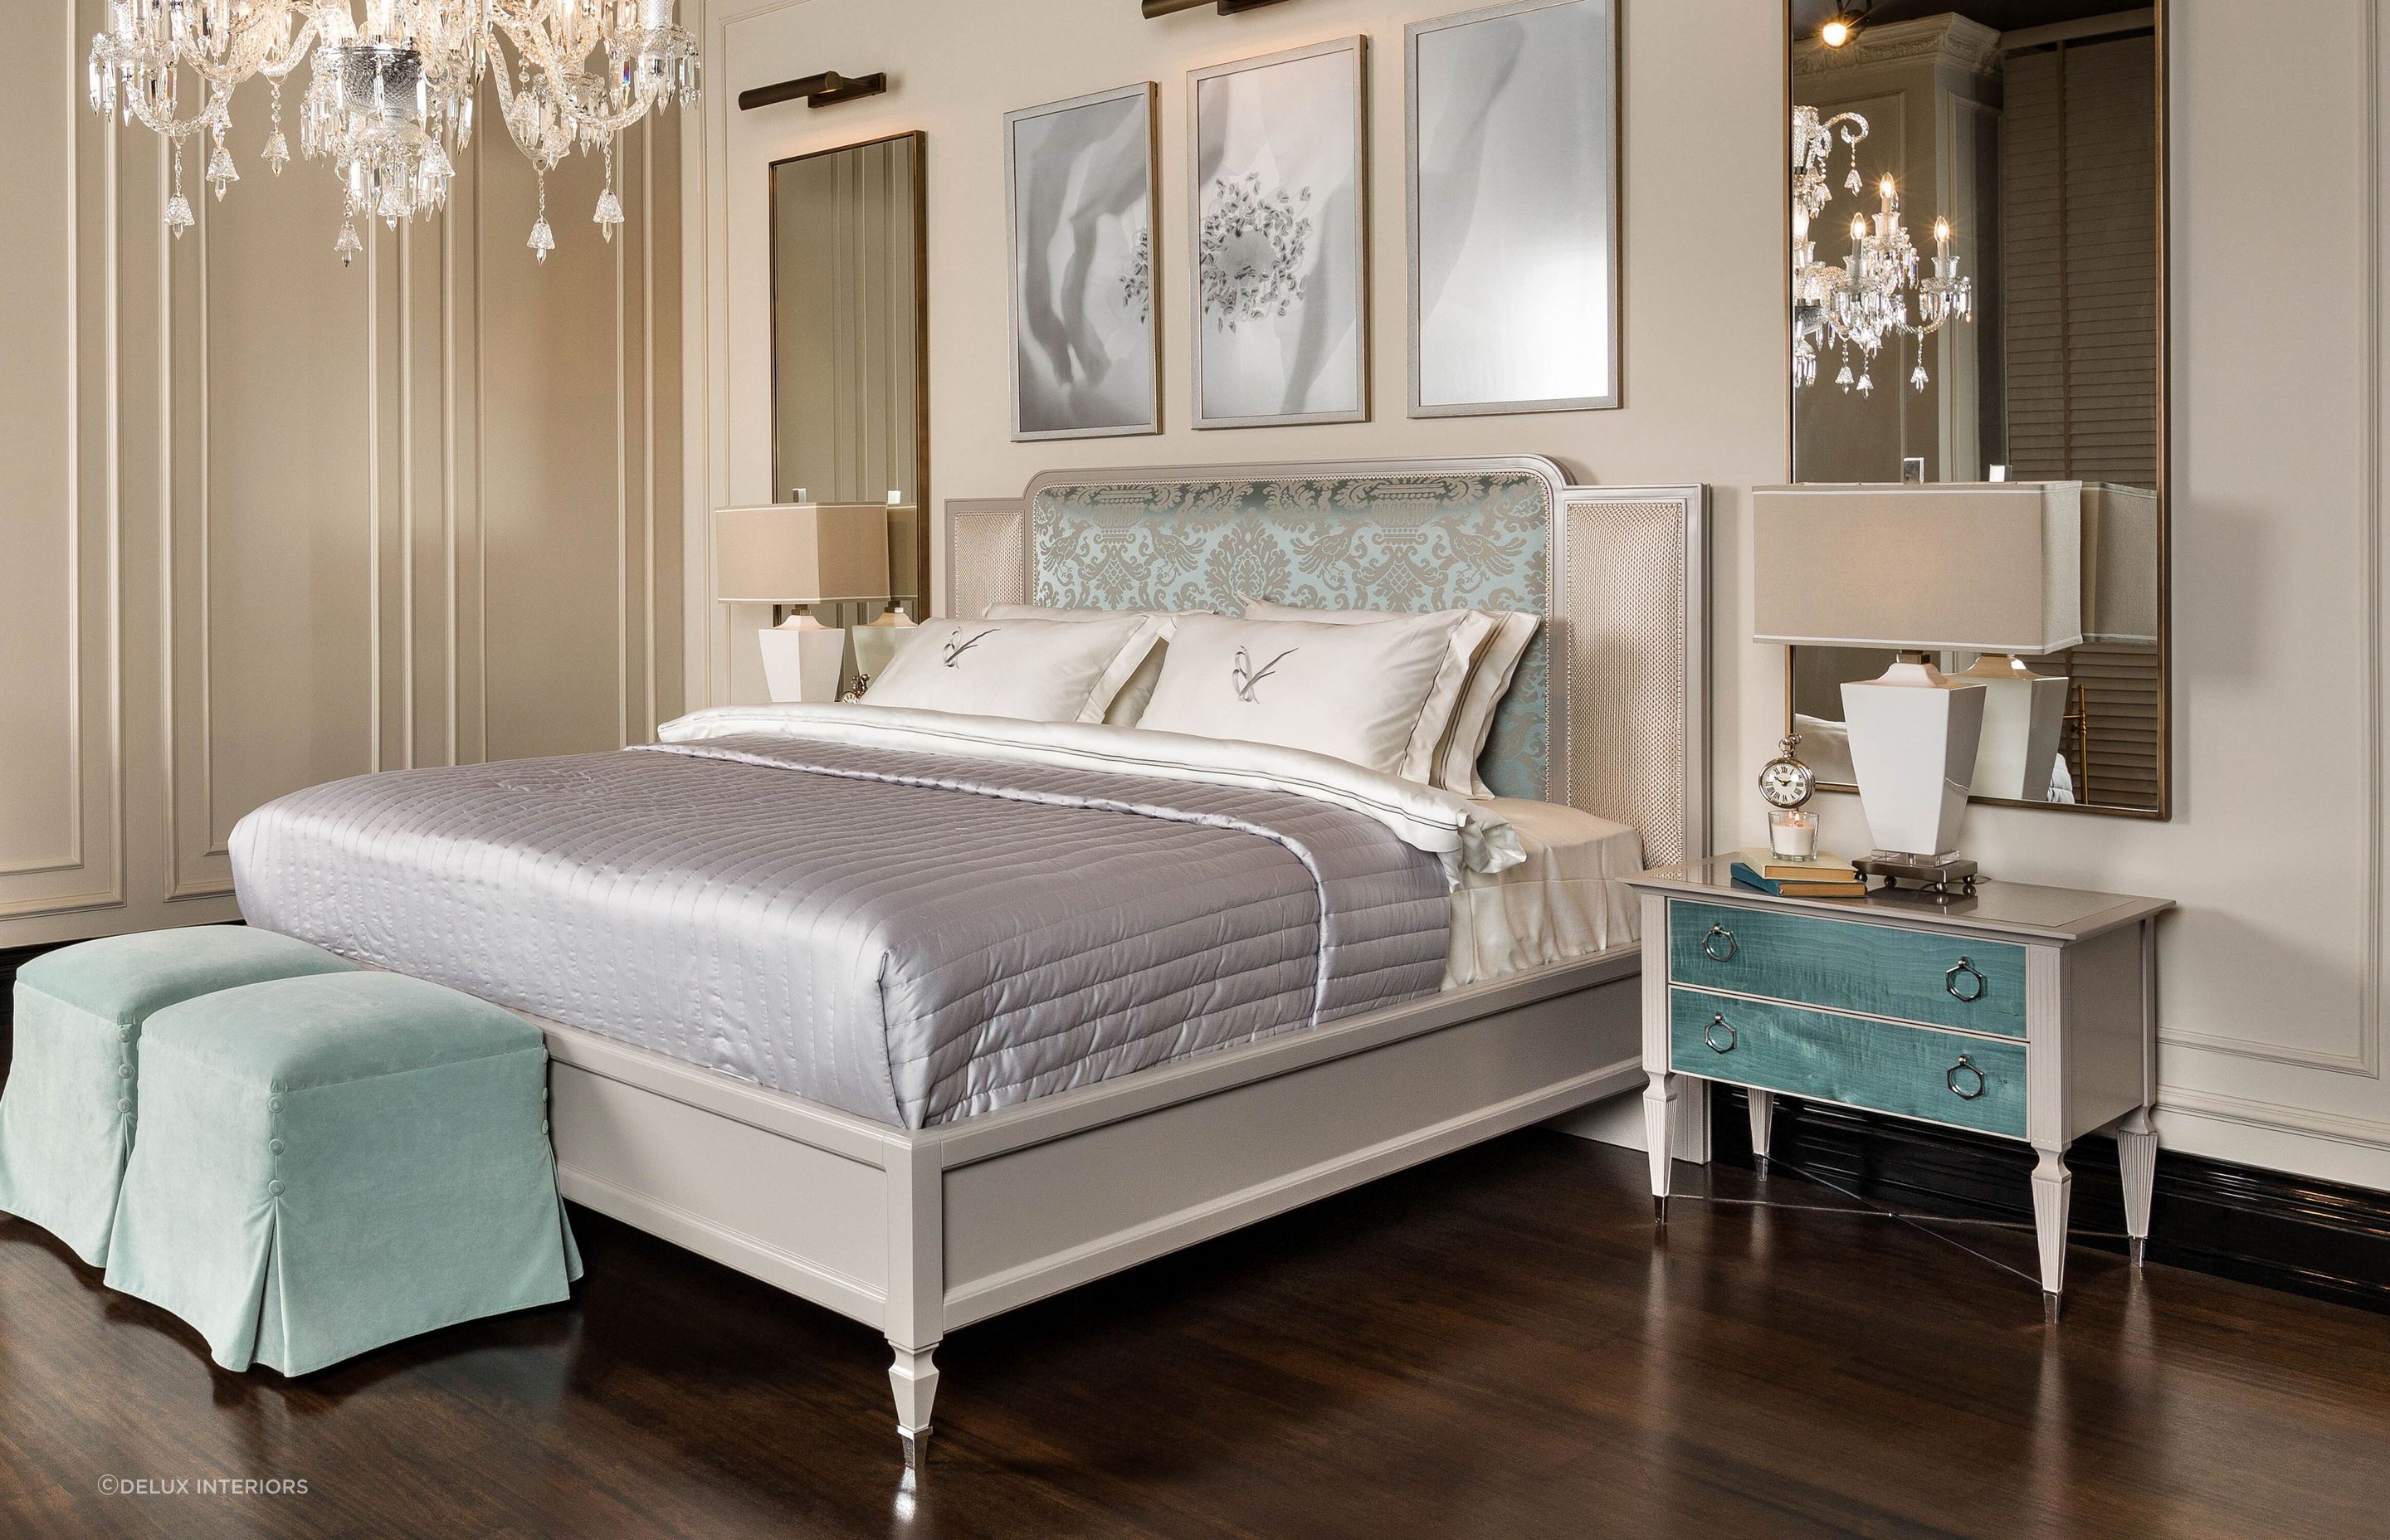 Options like the Laura Nightstand show how luxurious and timeless classical styling can be.